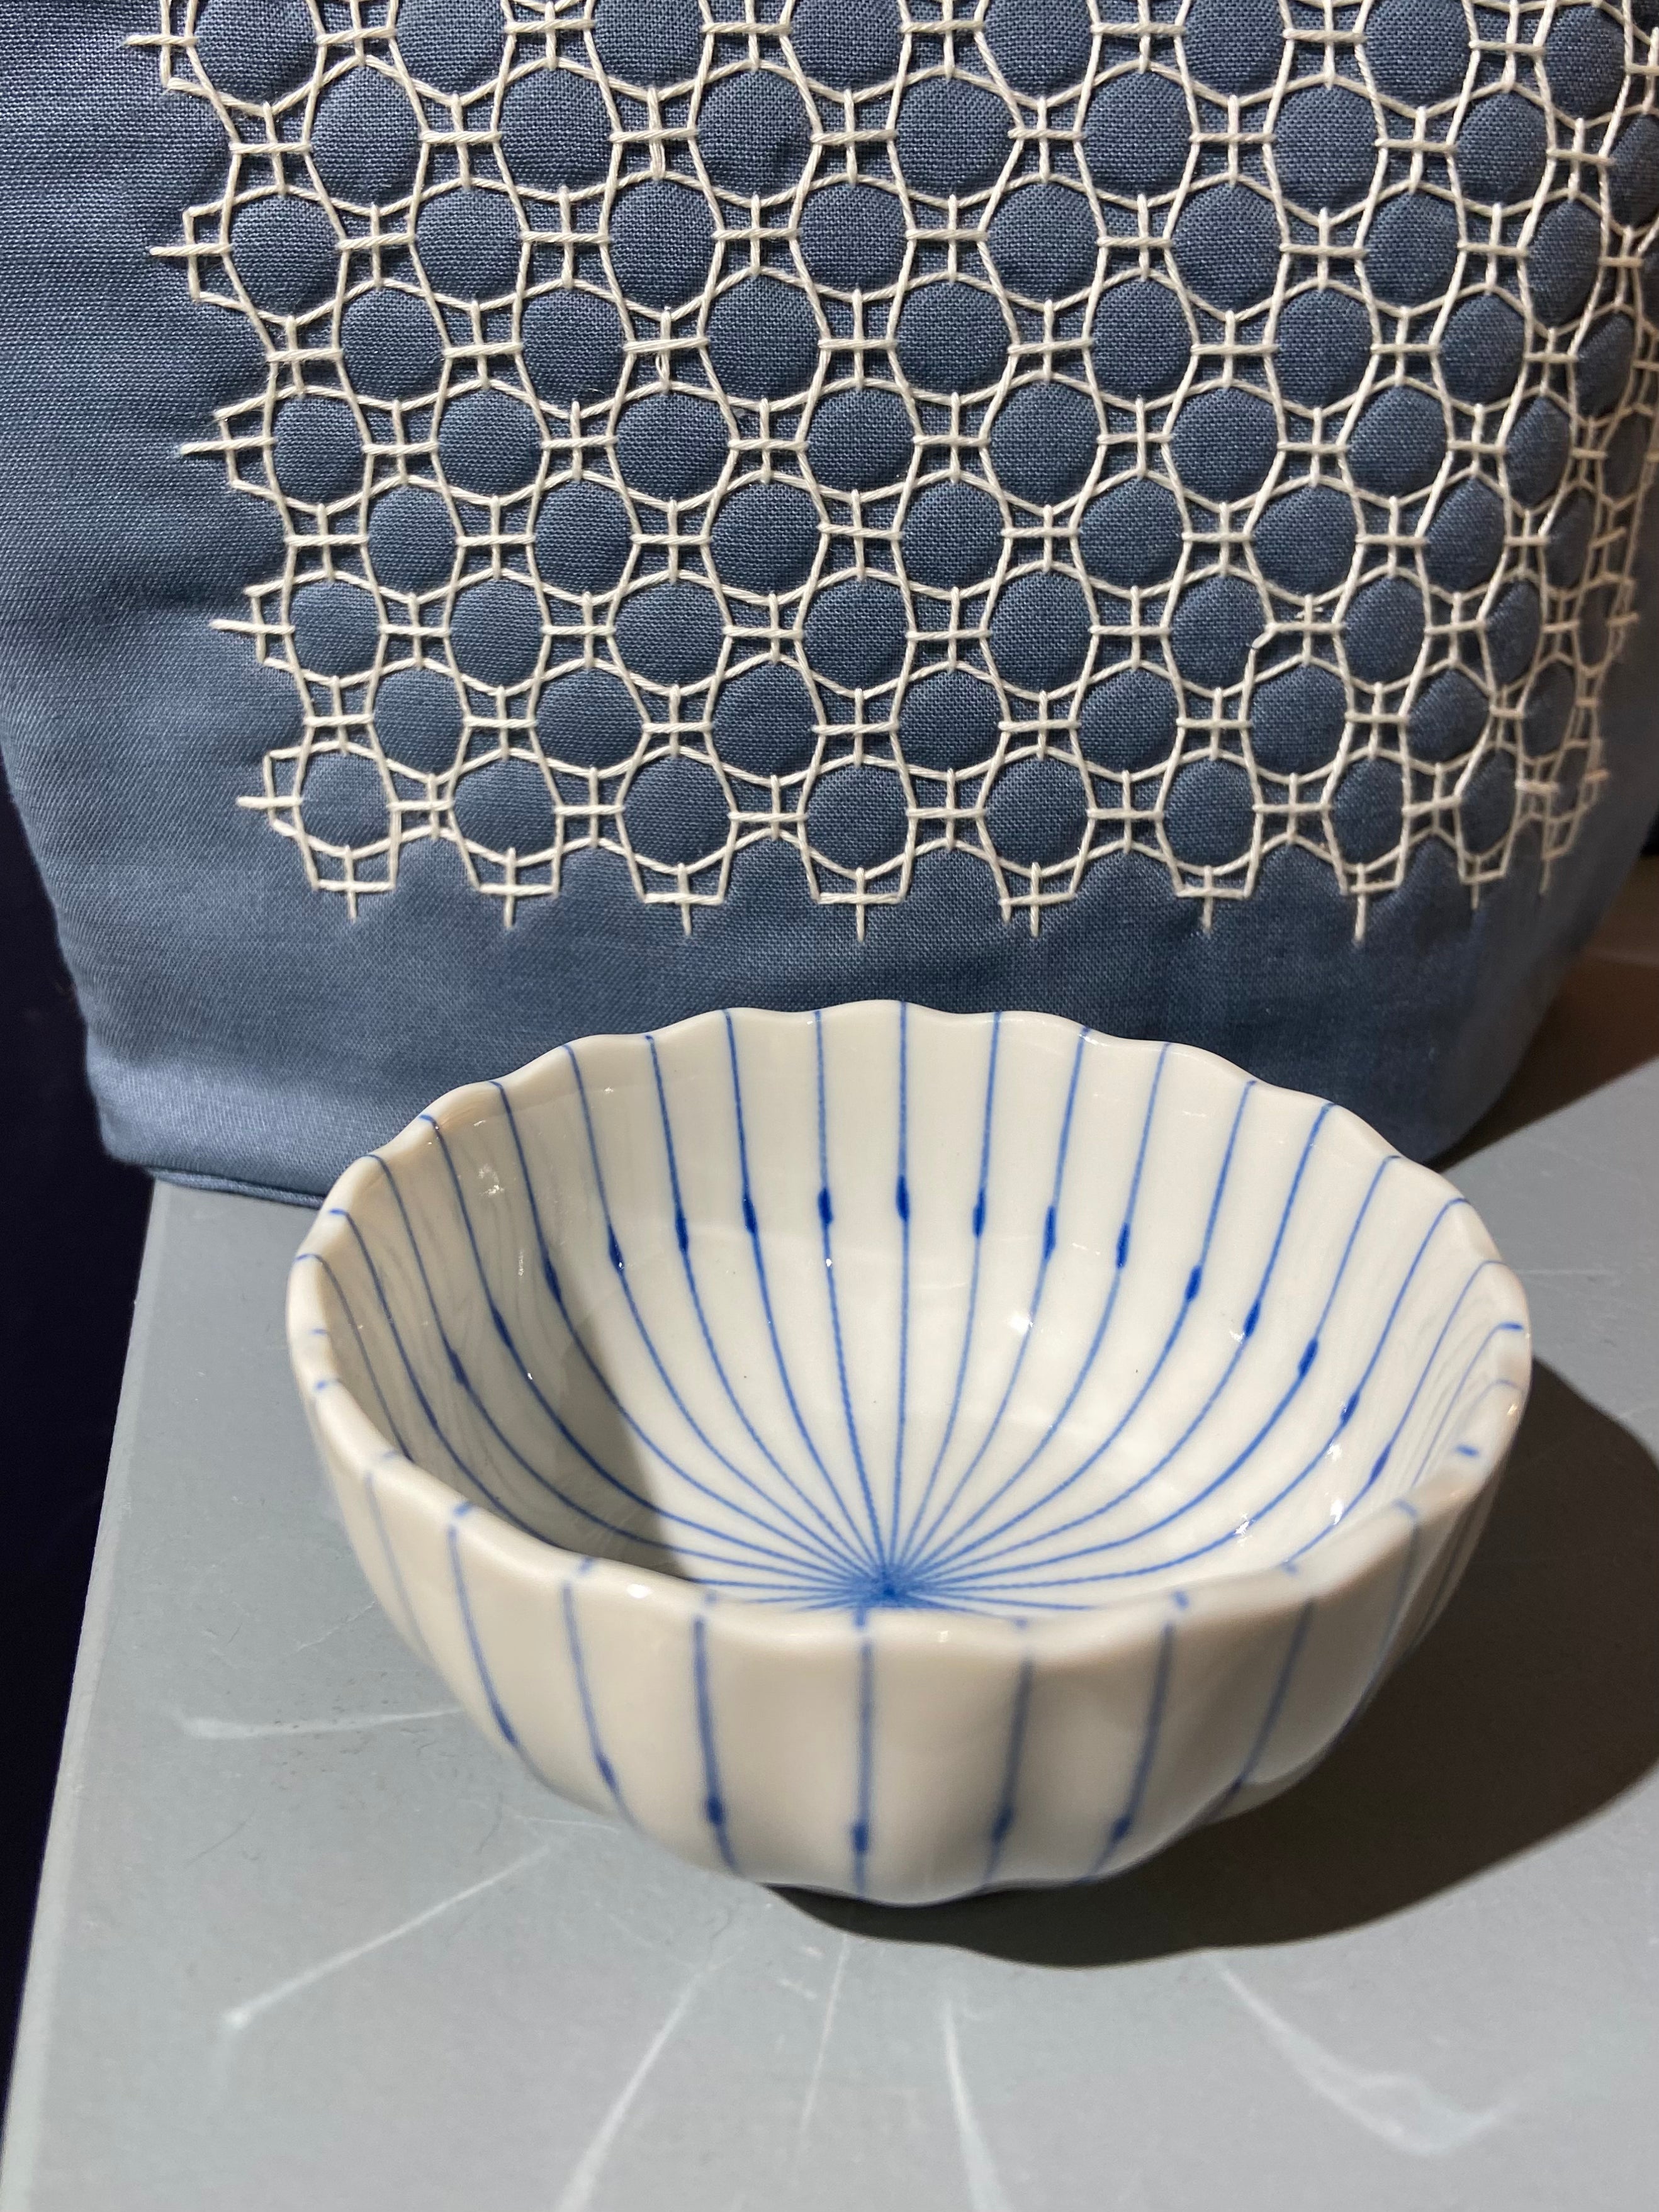 Small white bowl with blue stripes